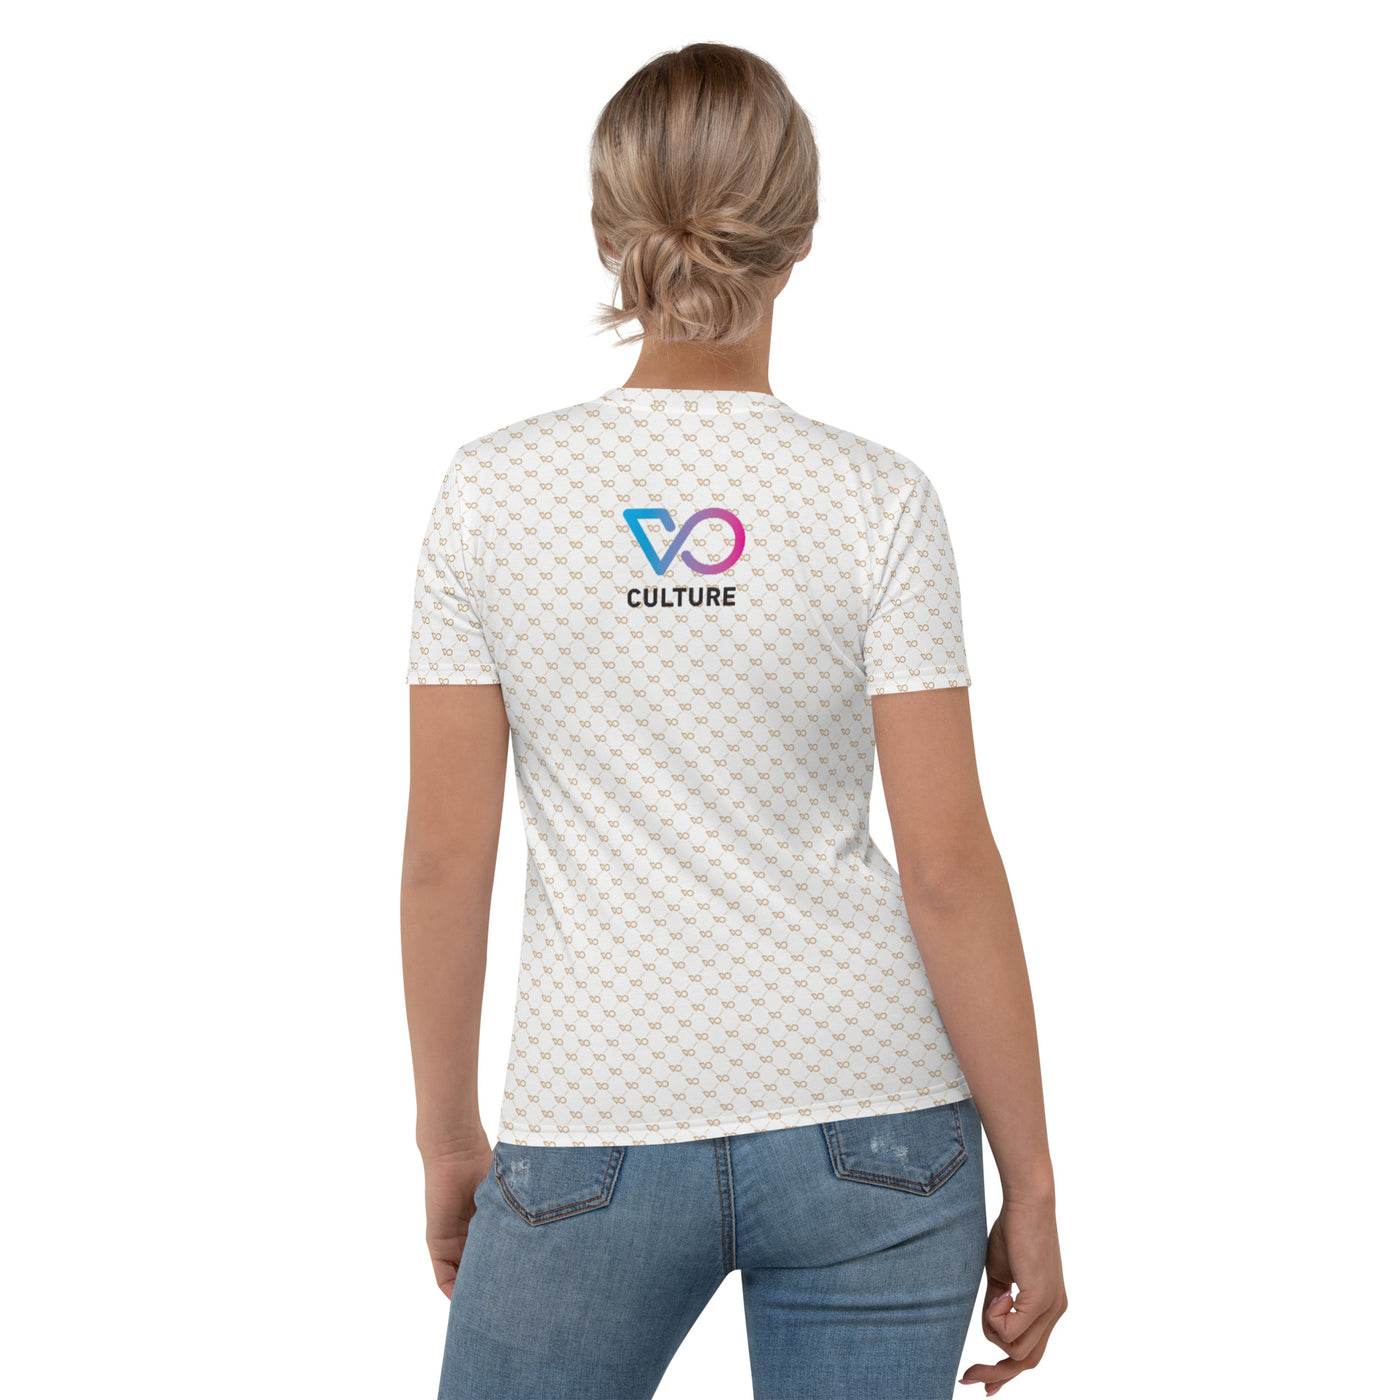 VO LOVE with Gold VO pattern Women's T-shirt